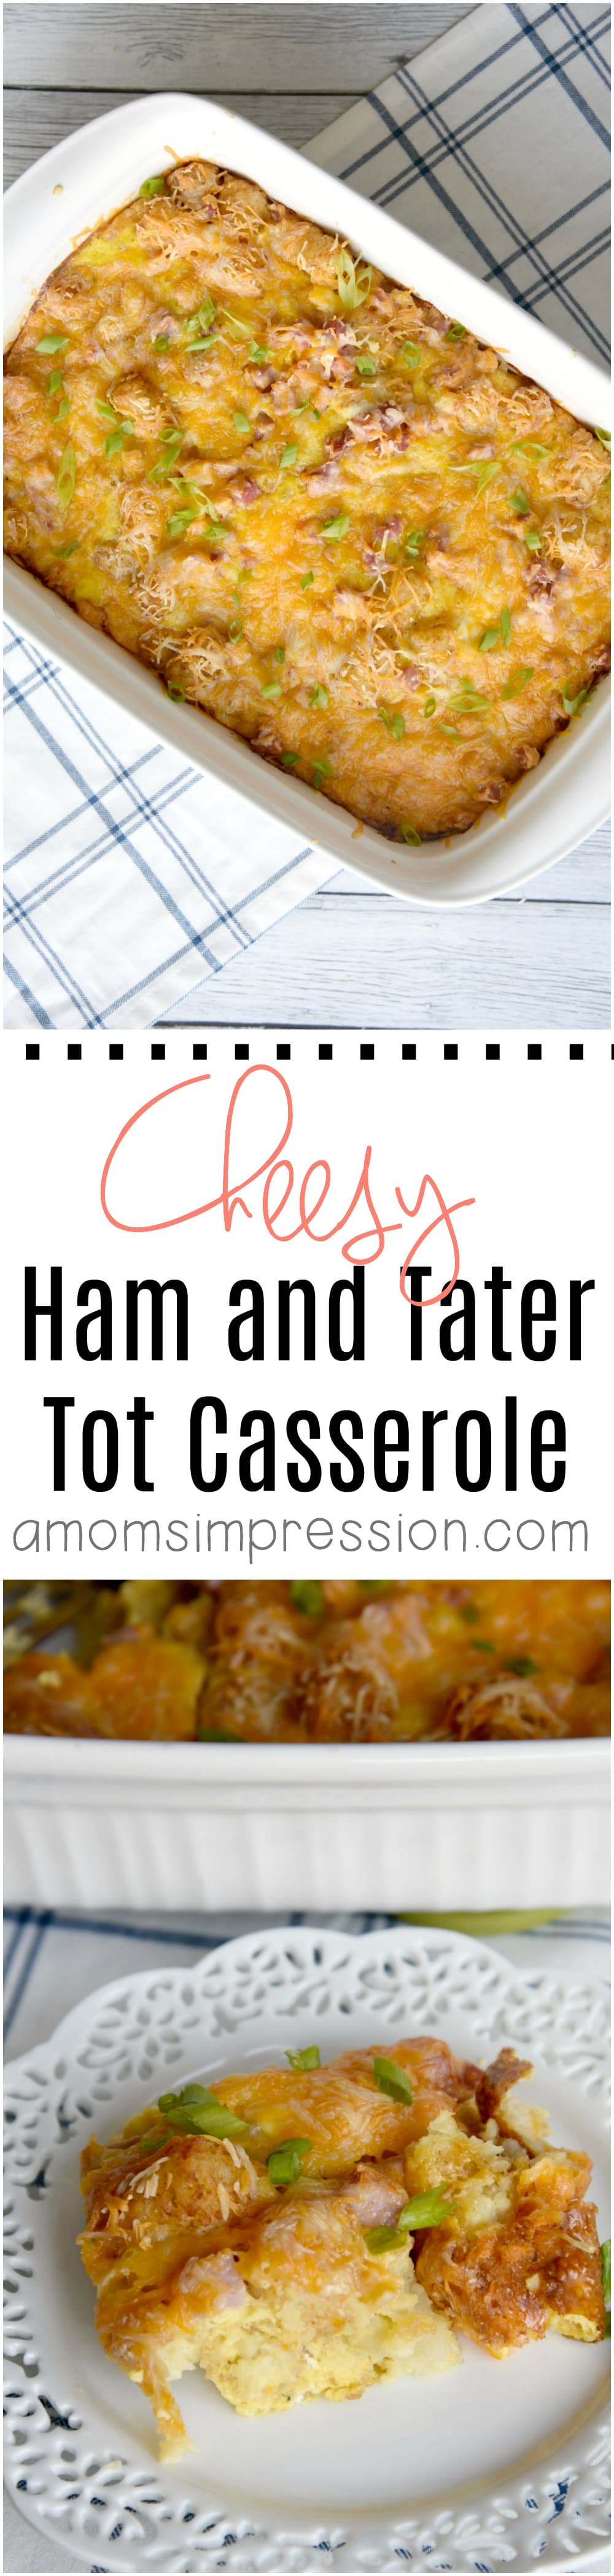 Looking for an easy breakfast casserole recipe? This Cheesy Ham and Tater Tot Casserole is a crowd pleaser. Make Ahead for an even easier morning. #casserole #breakfast